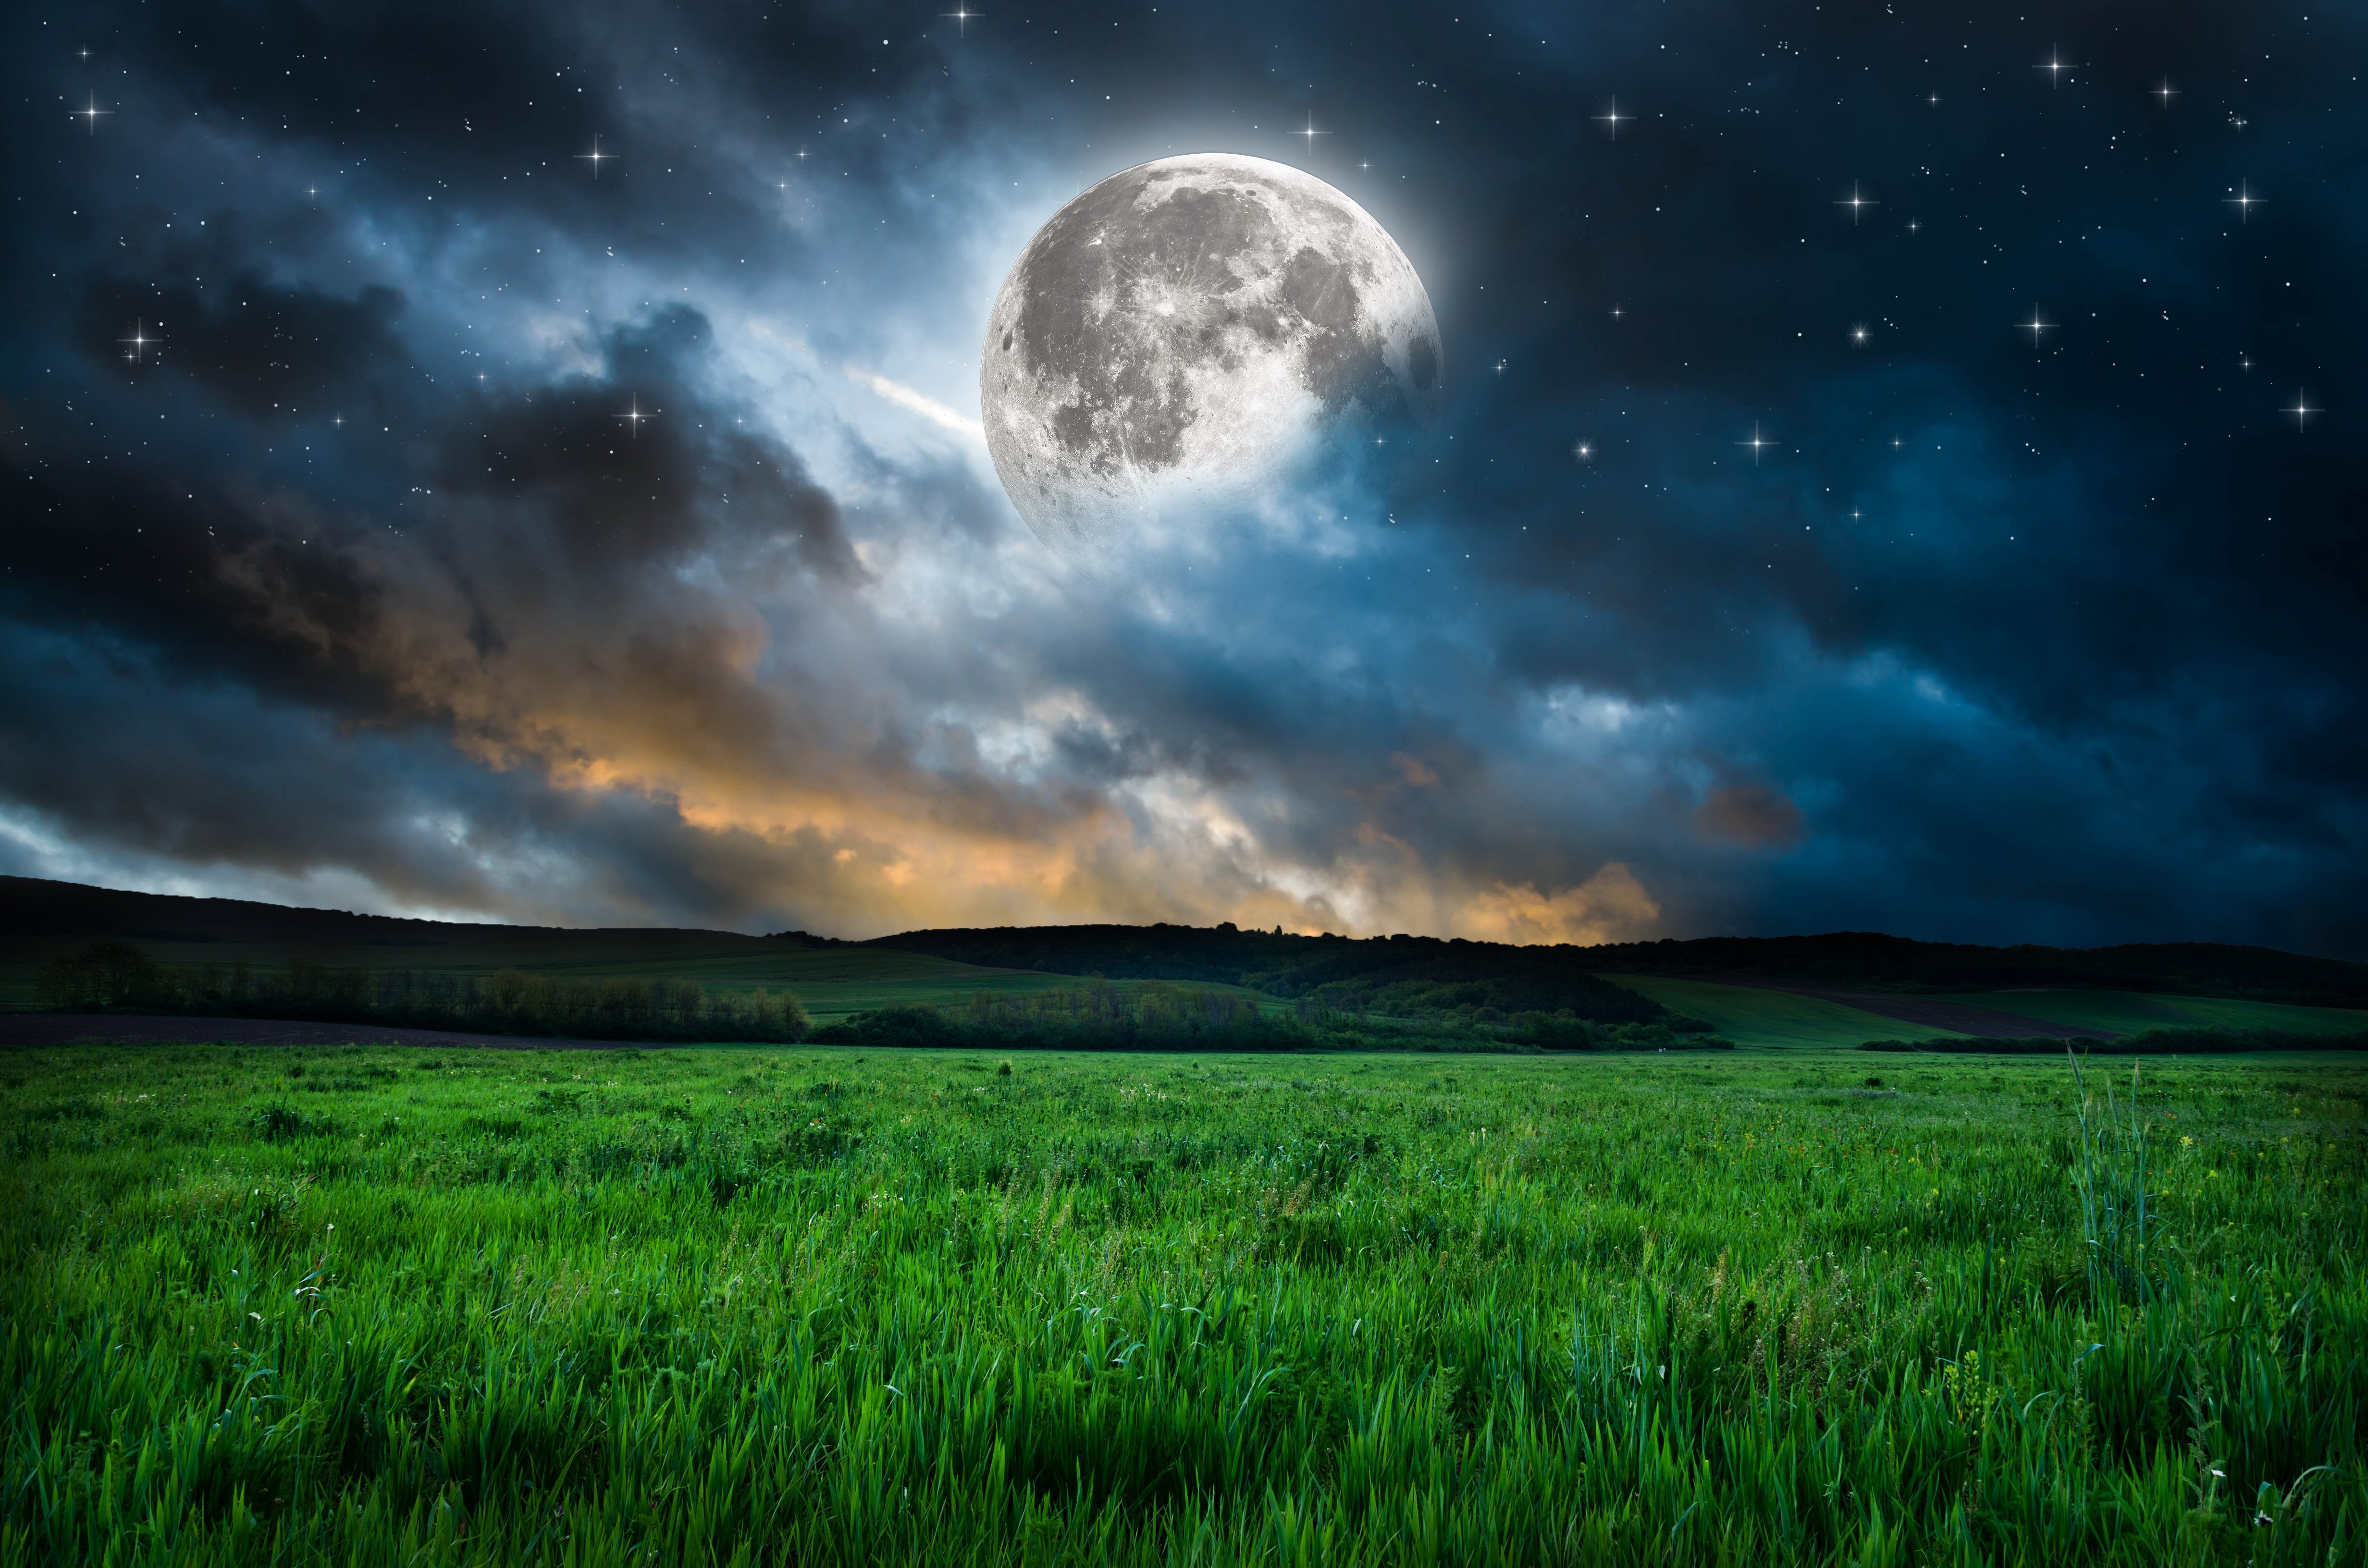 moon, Grass, Mood, Night, Stars, Fantasy, Dream, Nature, Landscape  Wallpapers HD / Desktop and Mobile Backgrounds